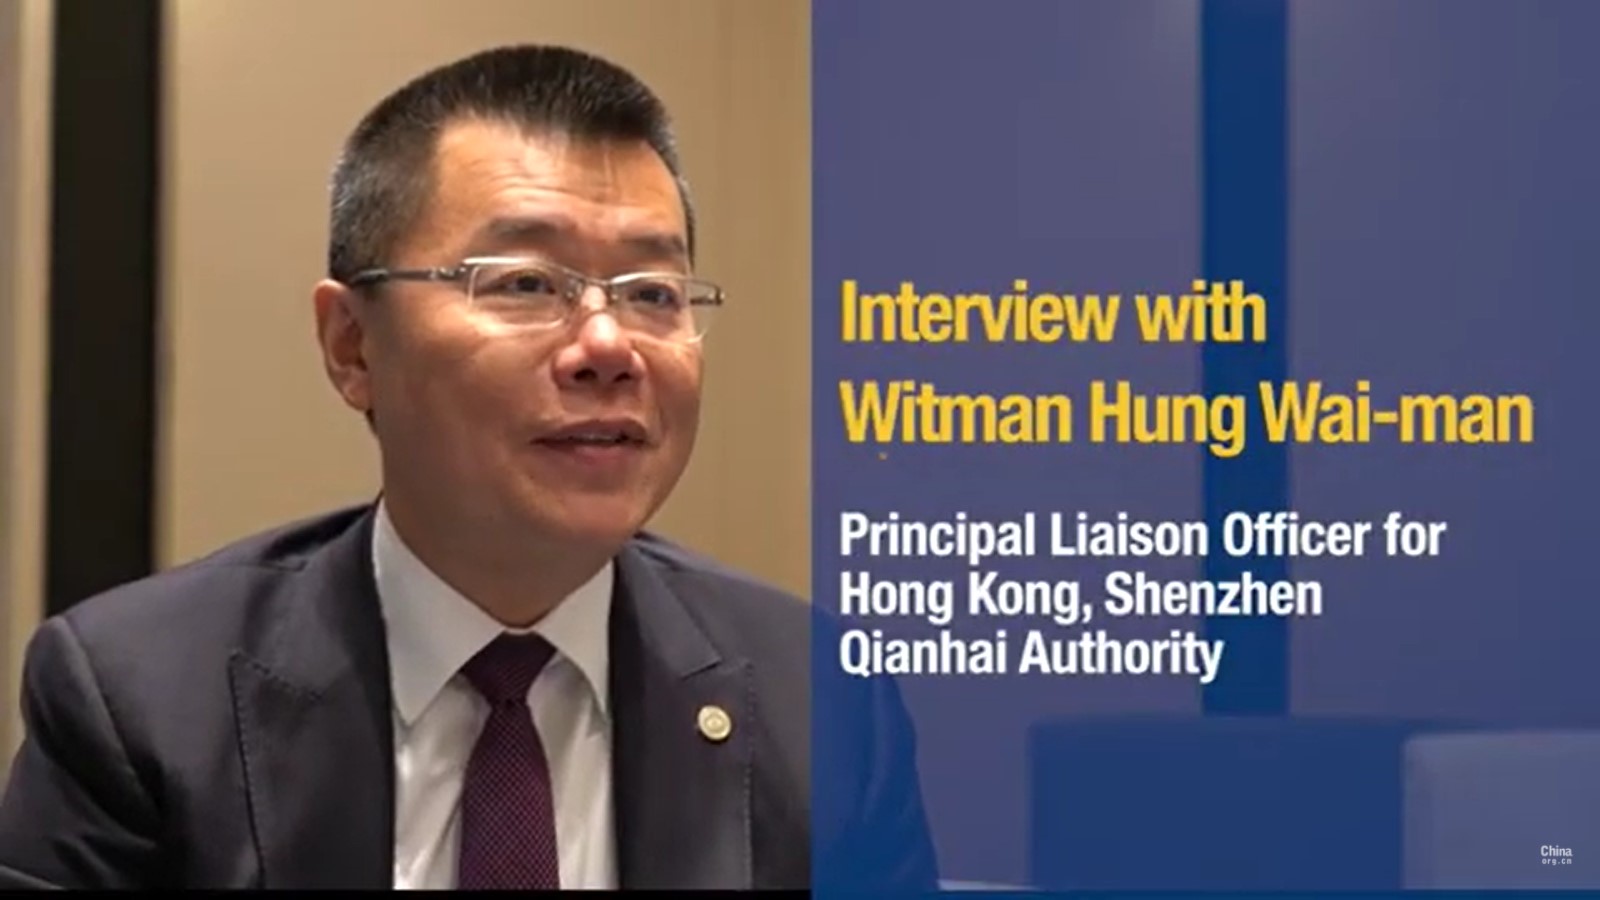 Interview with Witman Hung Wai-man